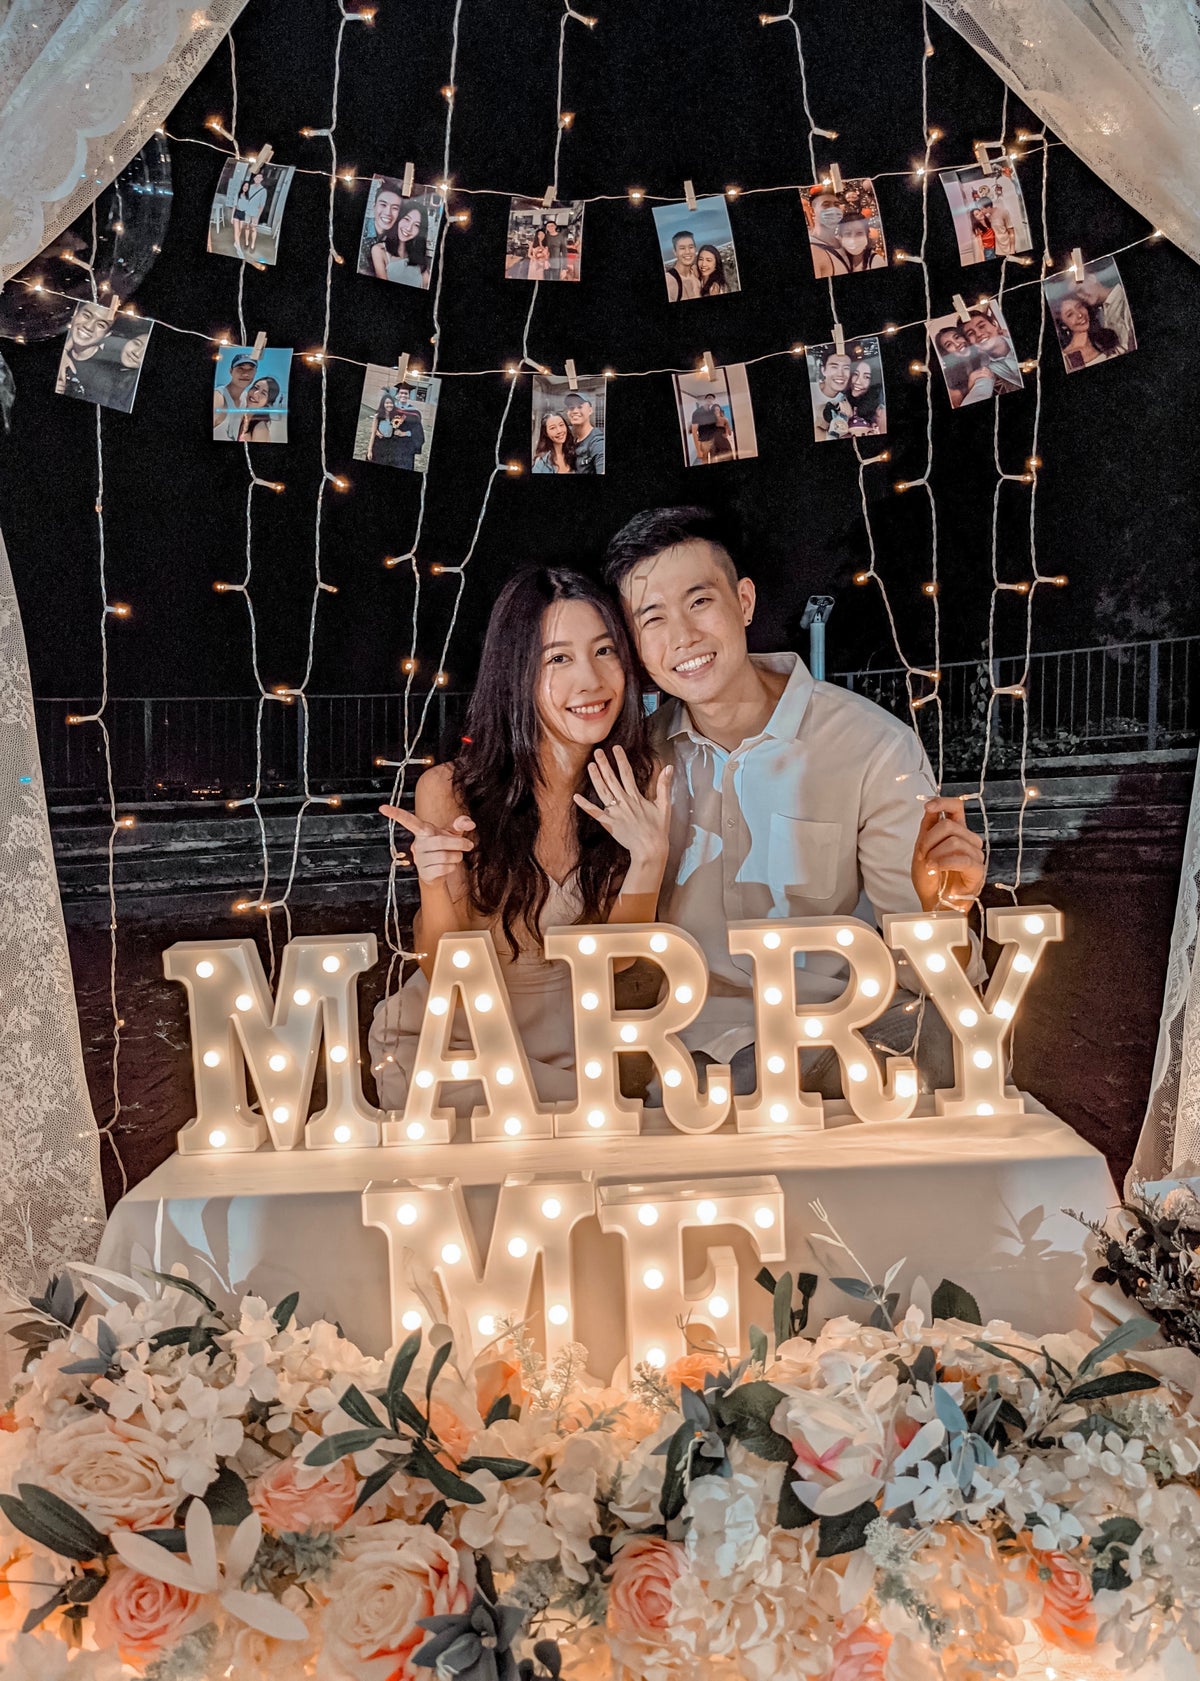 Romantic Outdoor Proposal Decor at Mount Faber Park in Singapore by Style It Simply